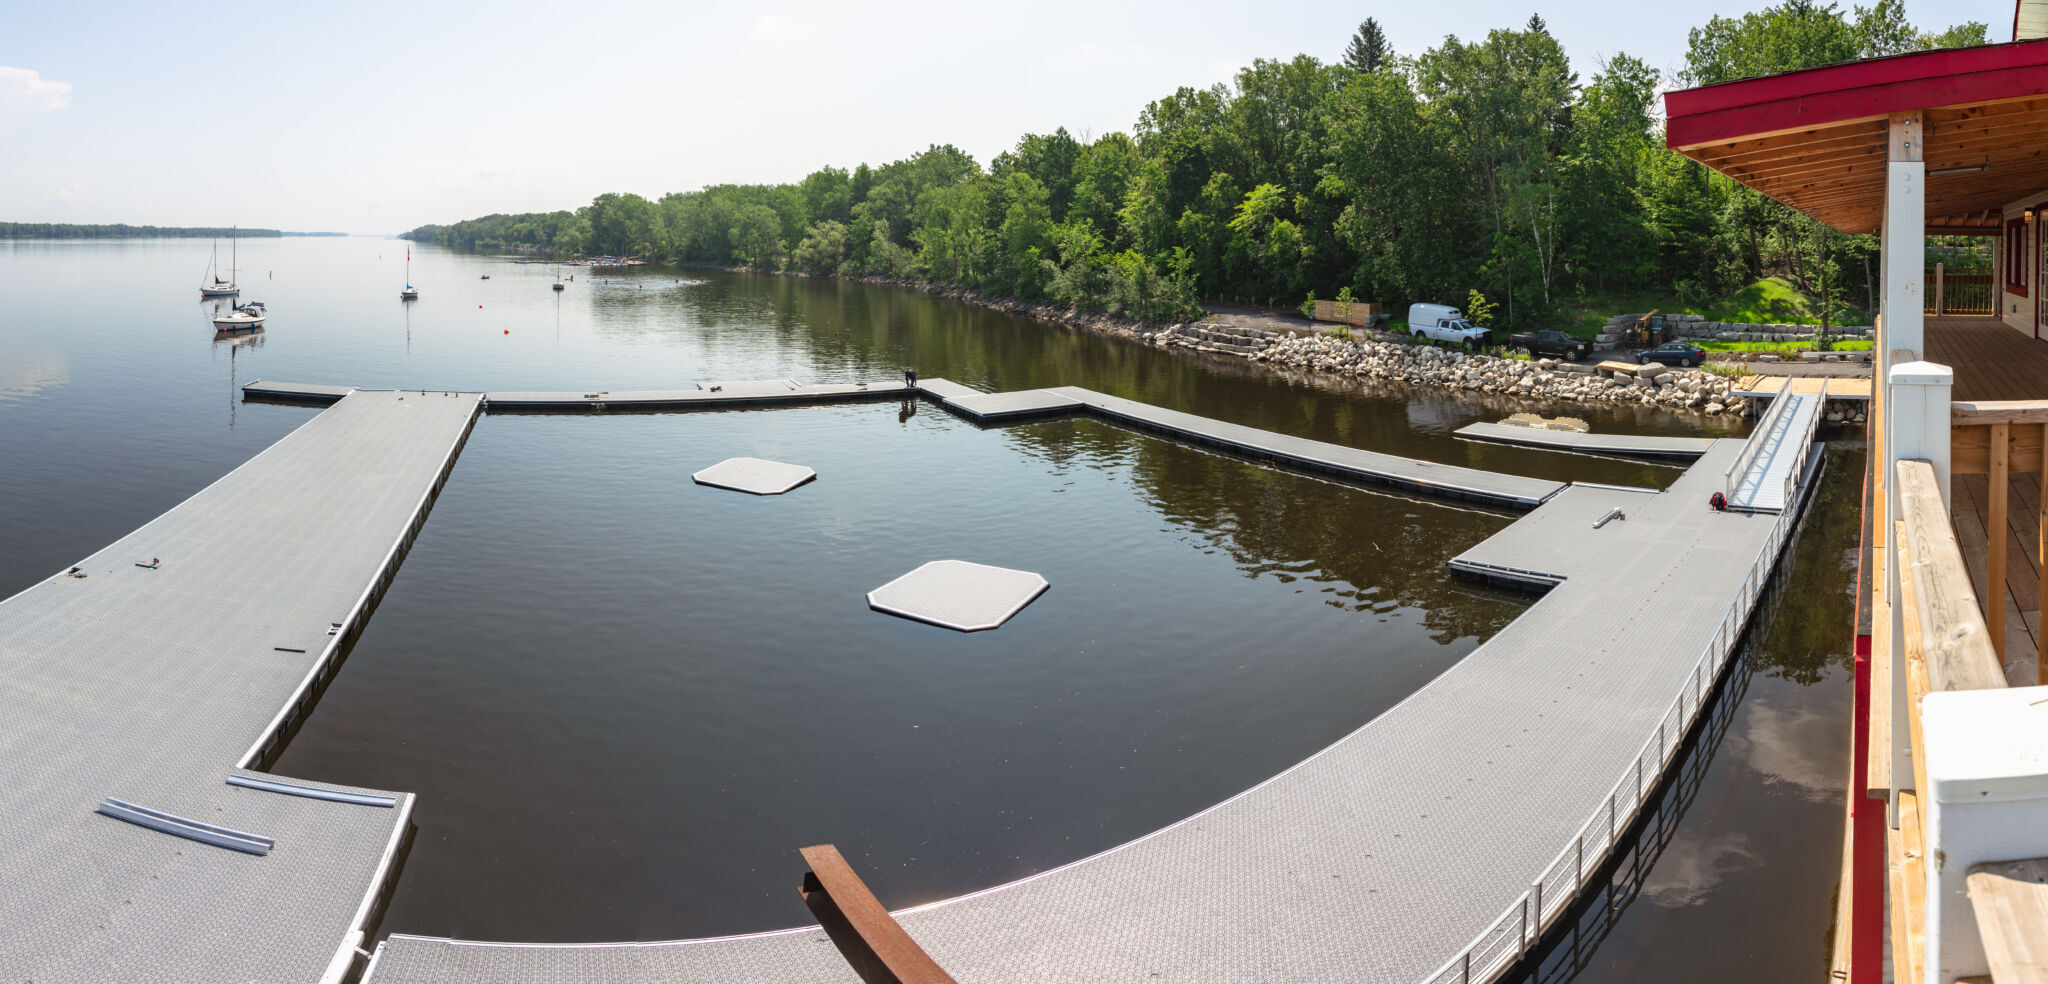 View of public dock providing access to the shoreline and swimming area